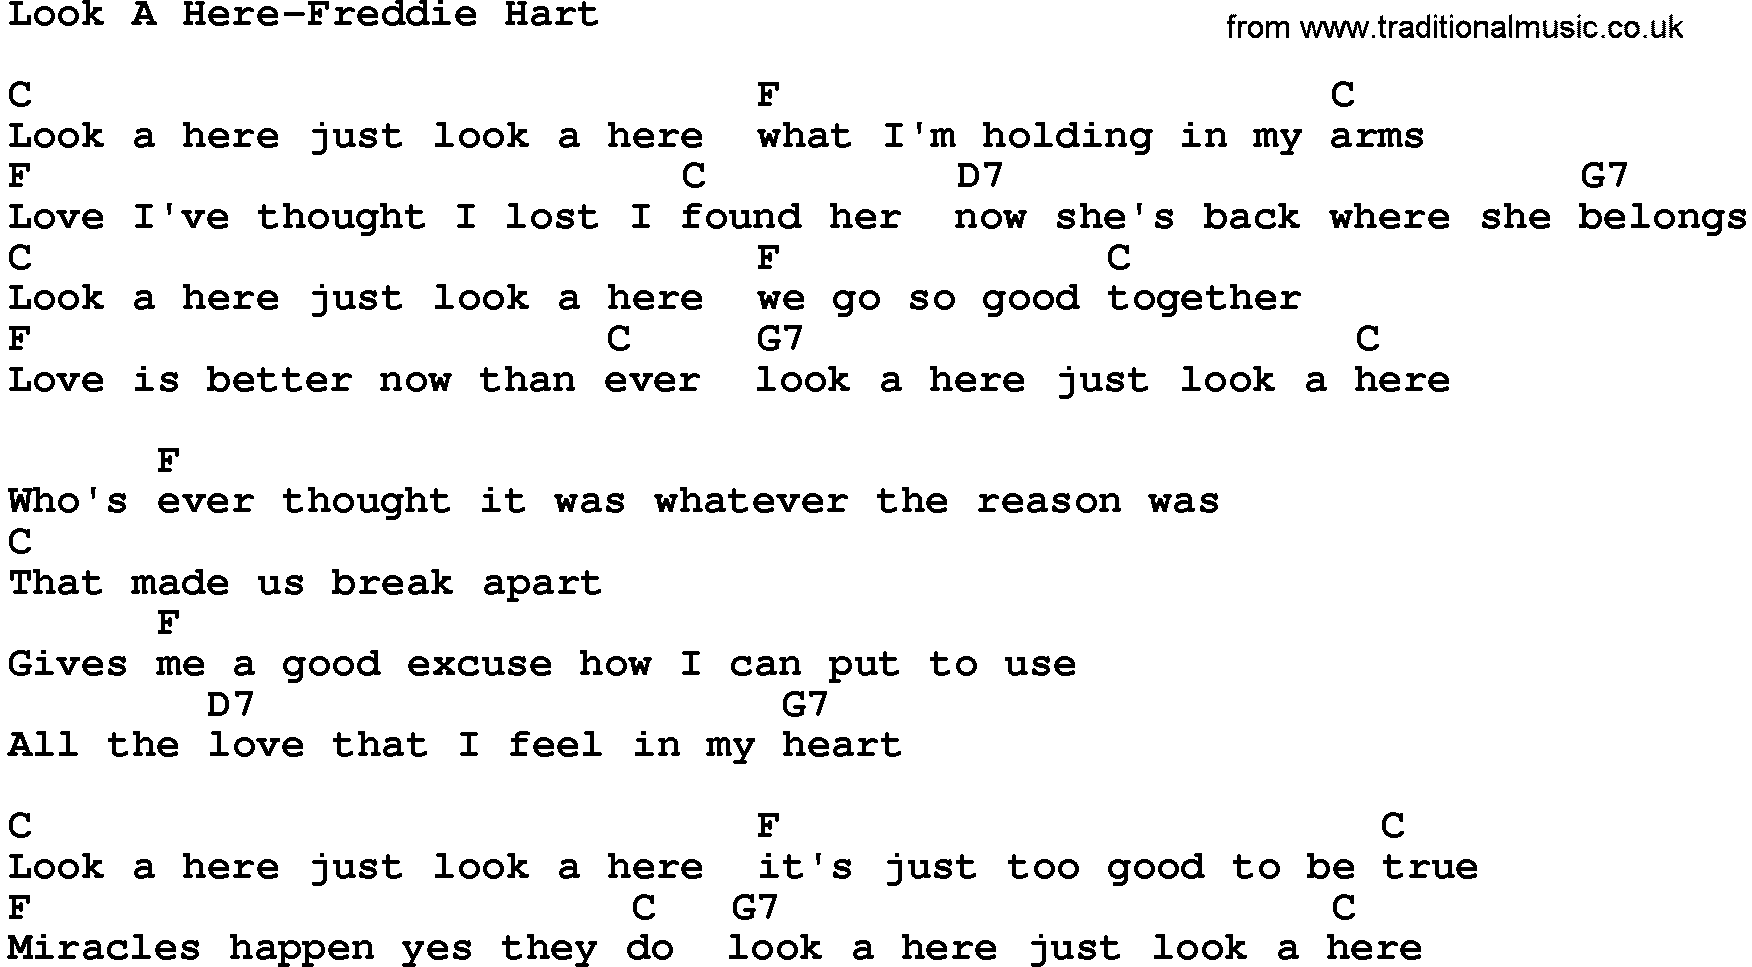 Country music song: Look A Here-Freddie Hart lyrics and chords